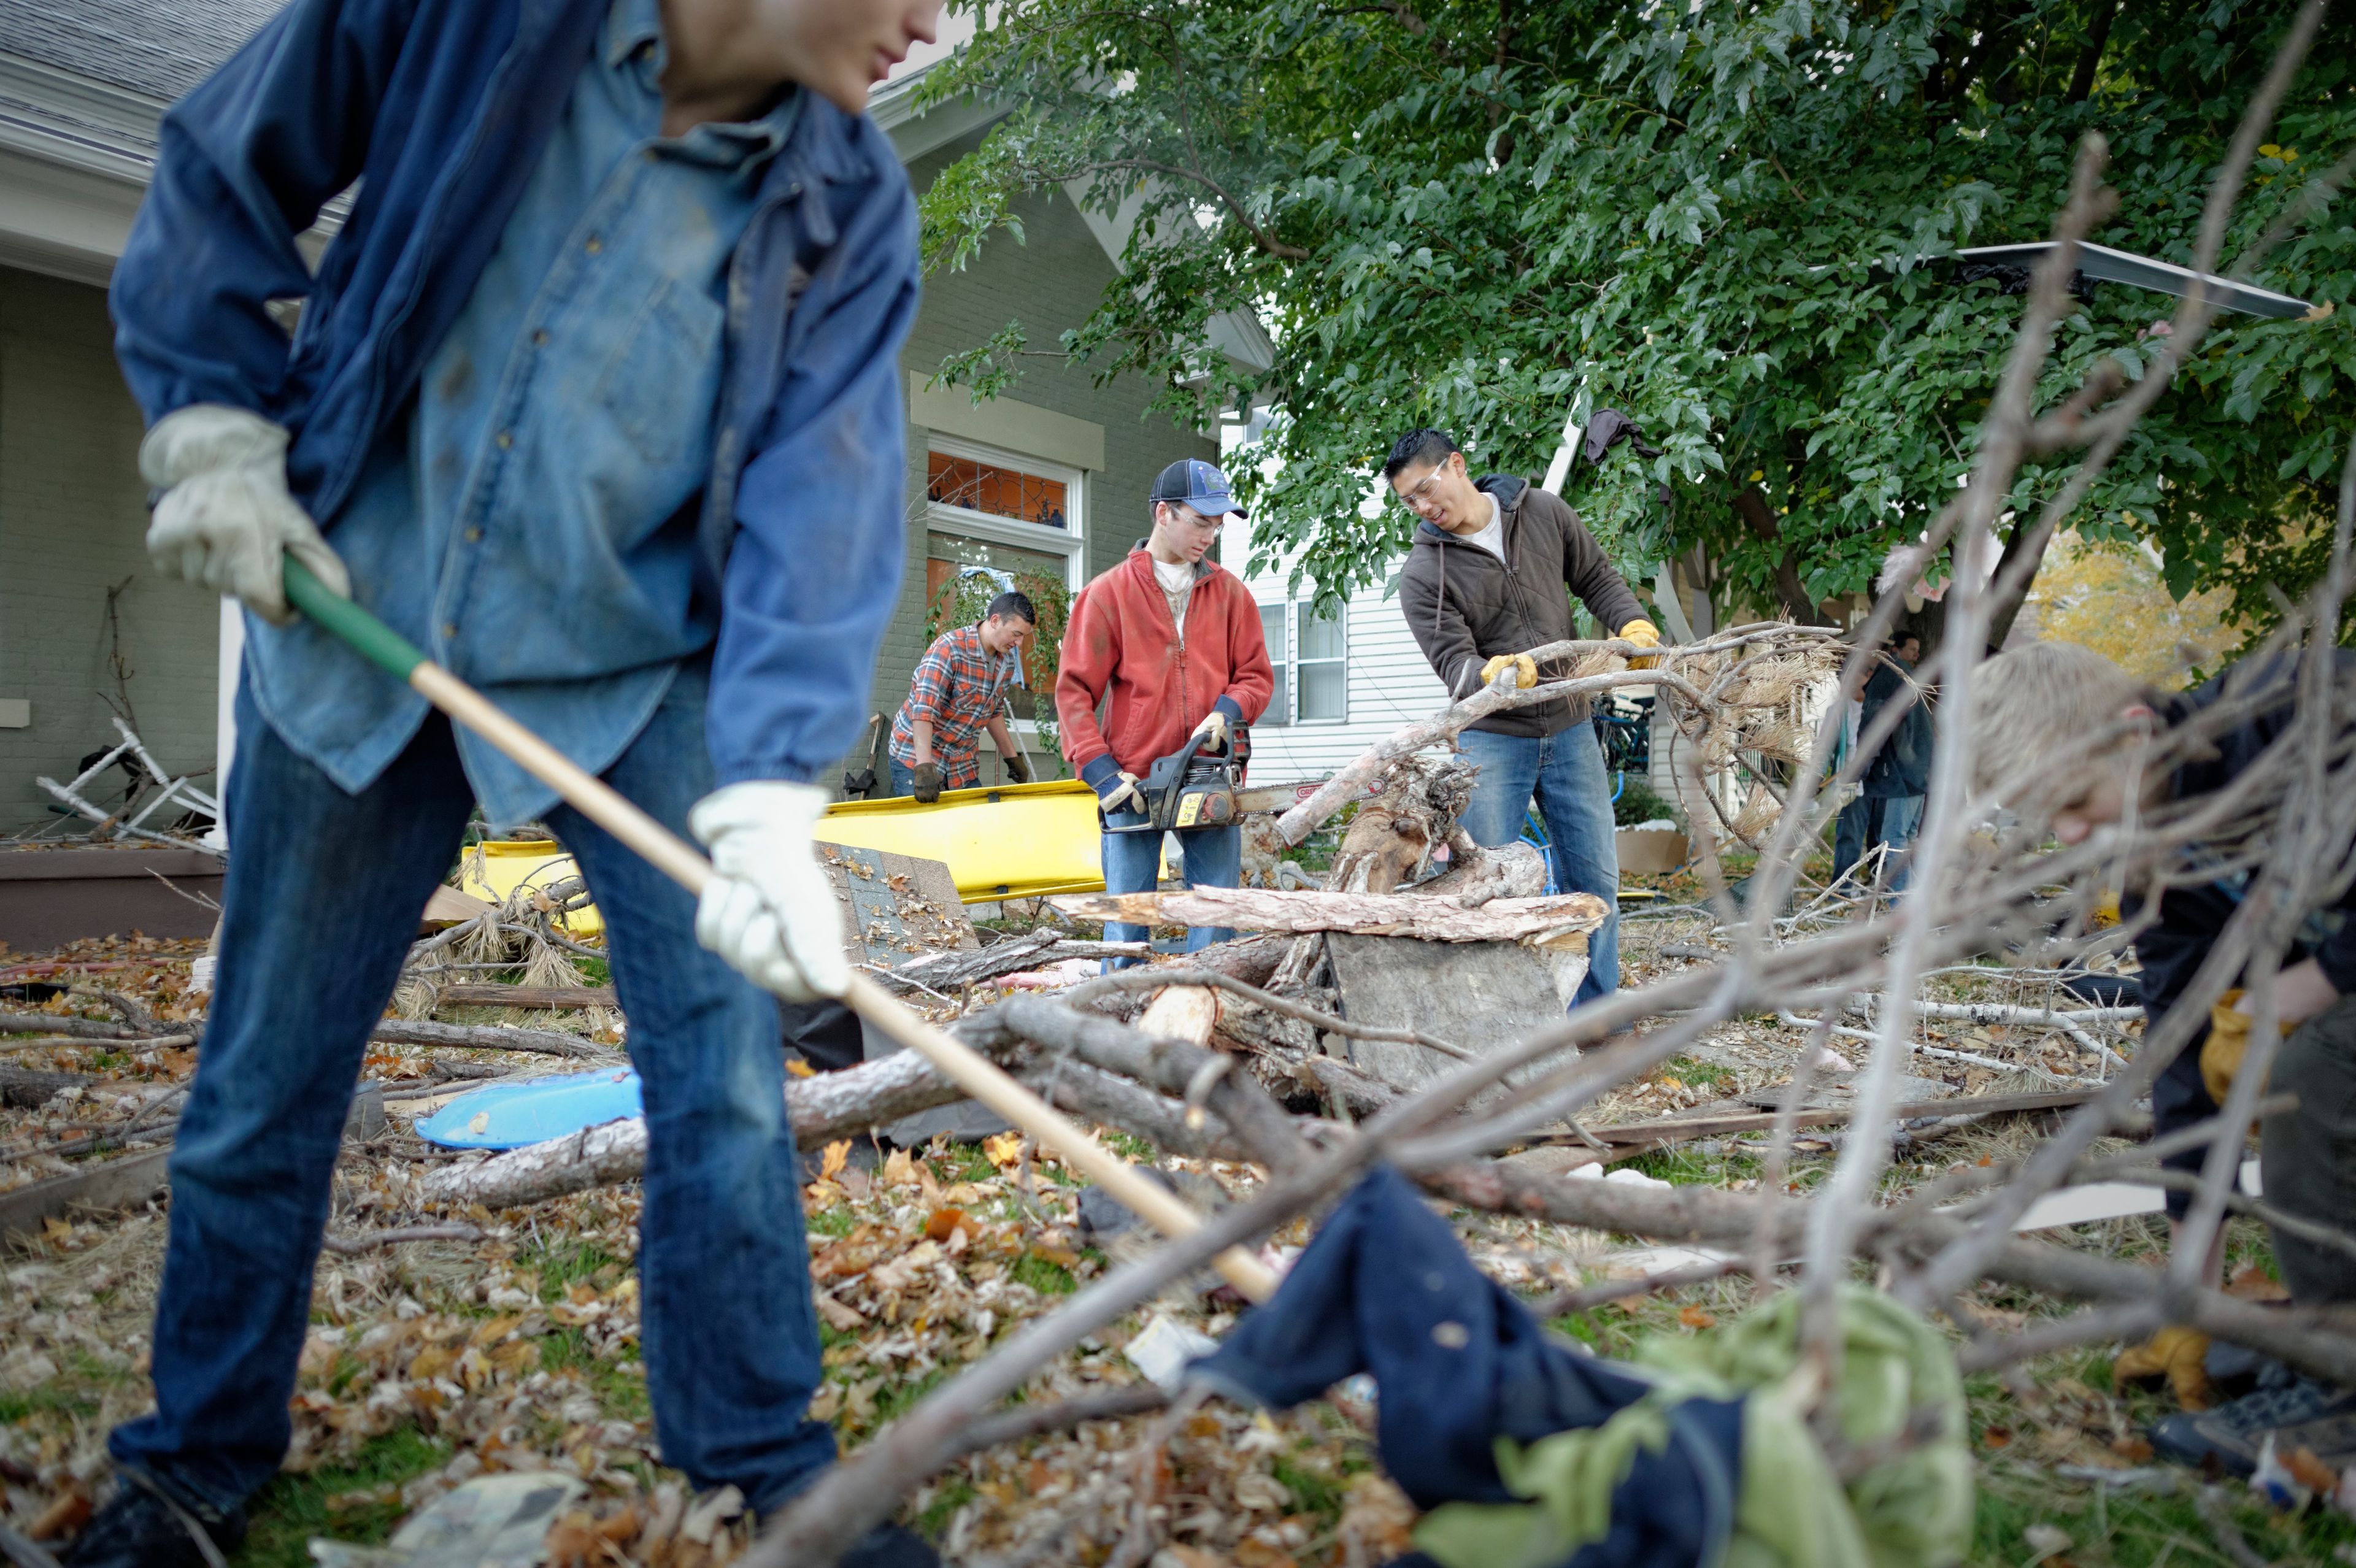 Young men help clean up fallen branches in someone’s yard.  